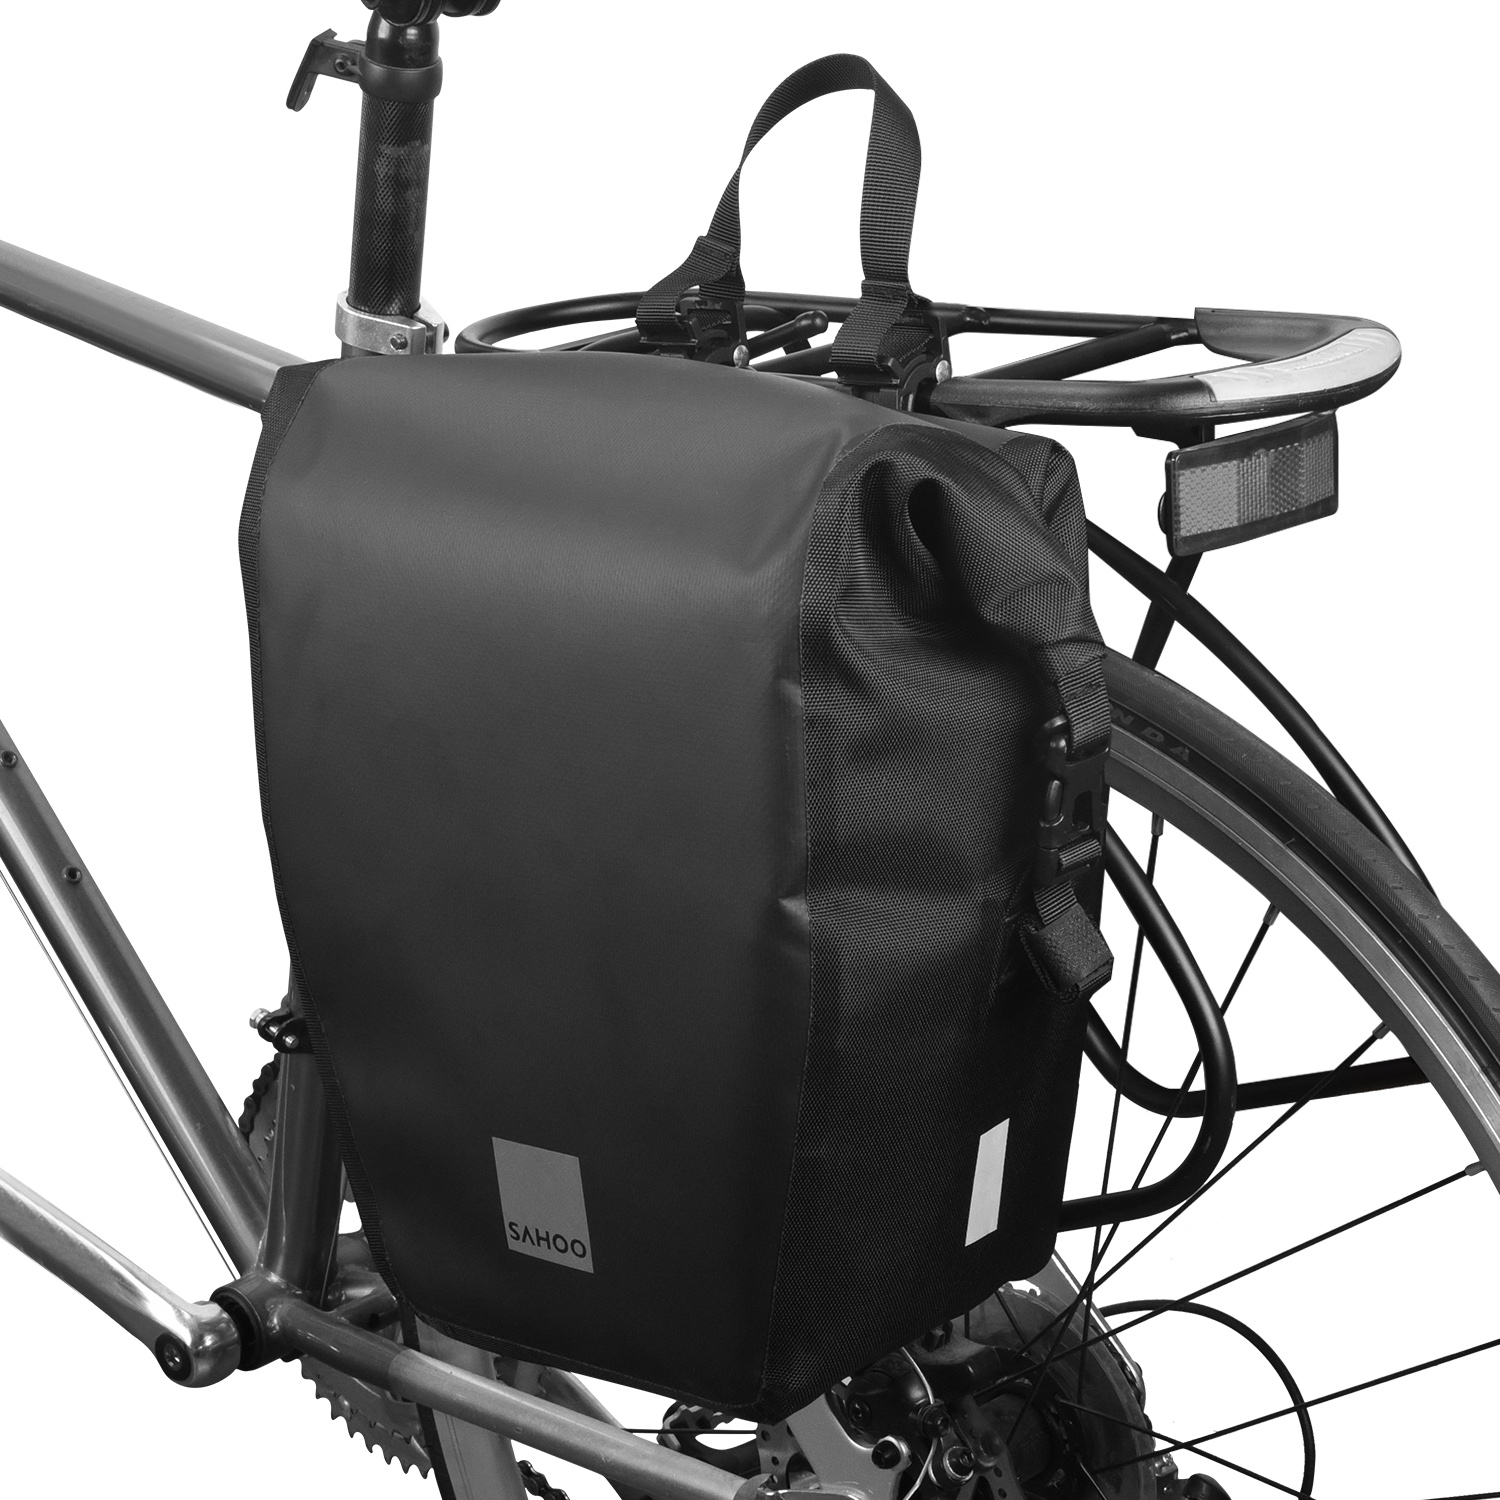 MOOUS Bicycle Rear Carrier Bag Cycling Rack Bag Seat Cargo Bag Waterproof Pannier Rack Bag Single Shoulder Bag with Adjustable Strap for Outdoor Activities